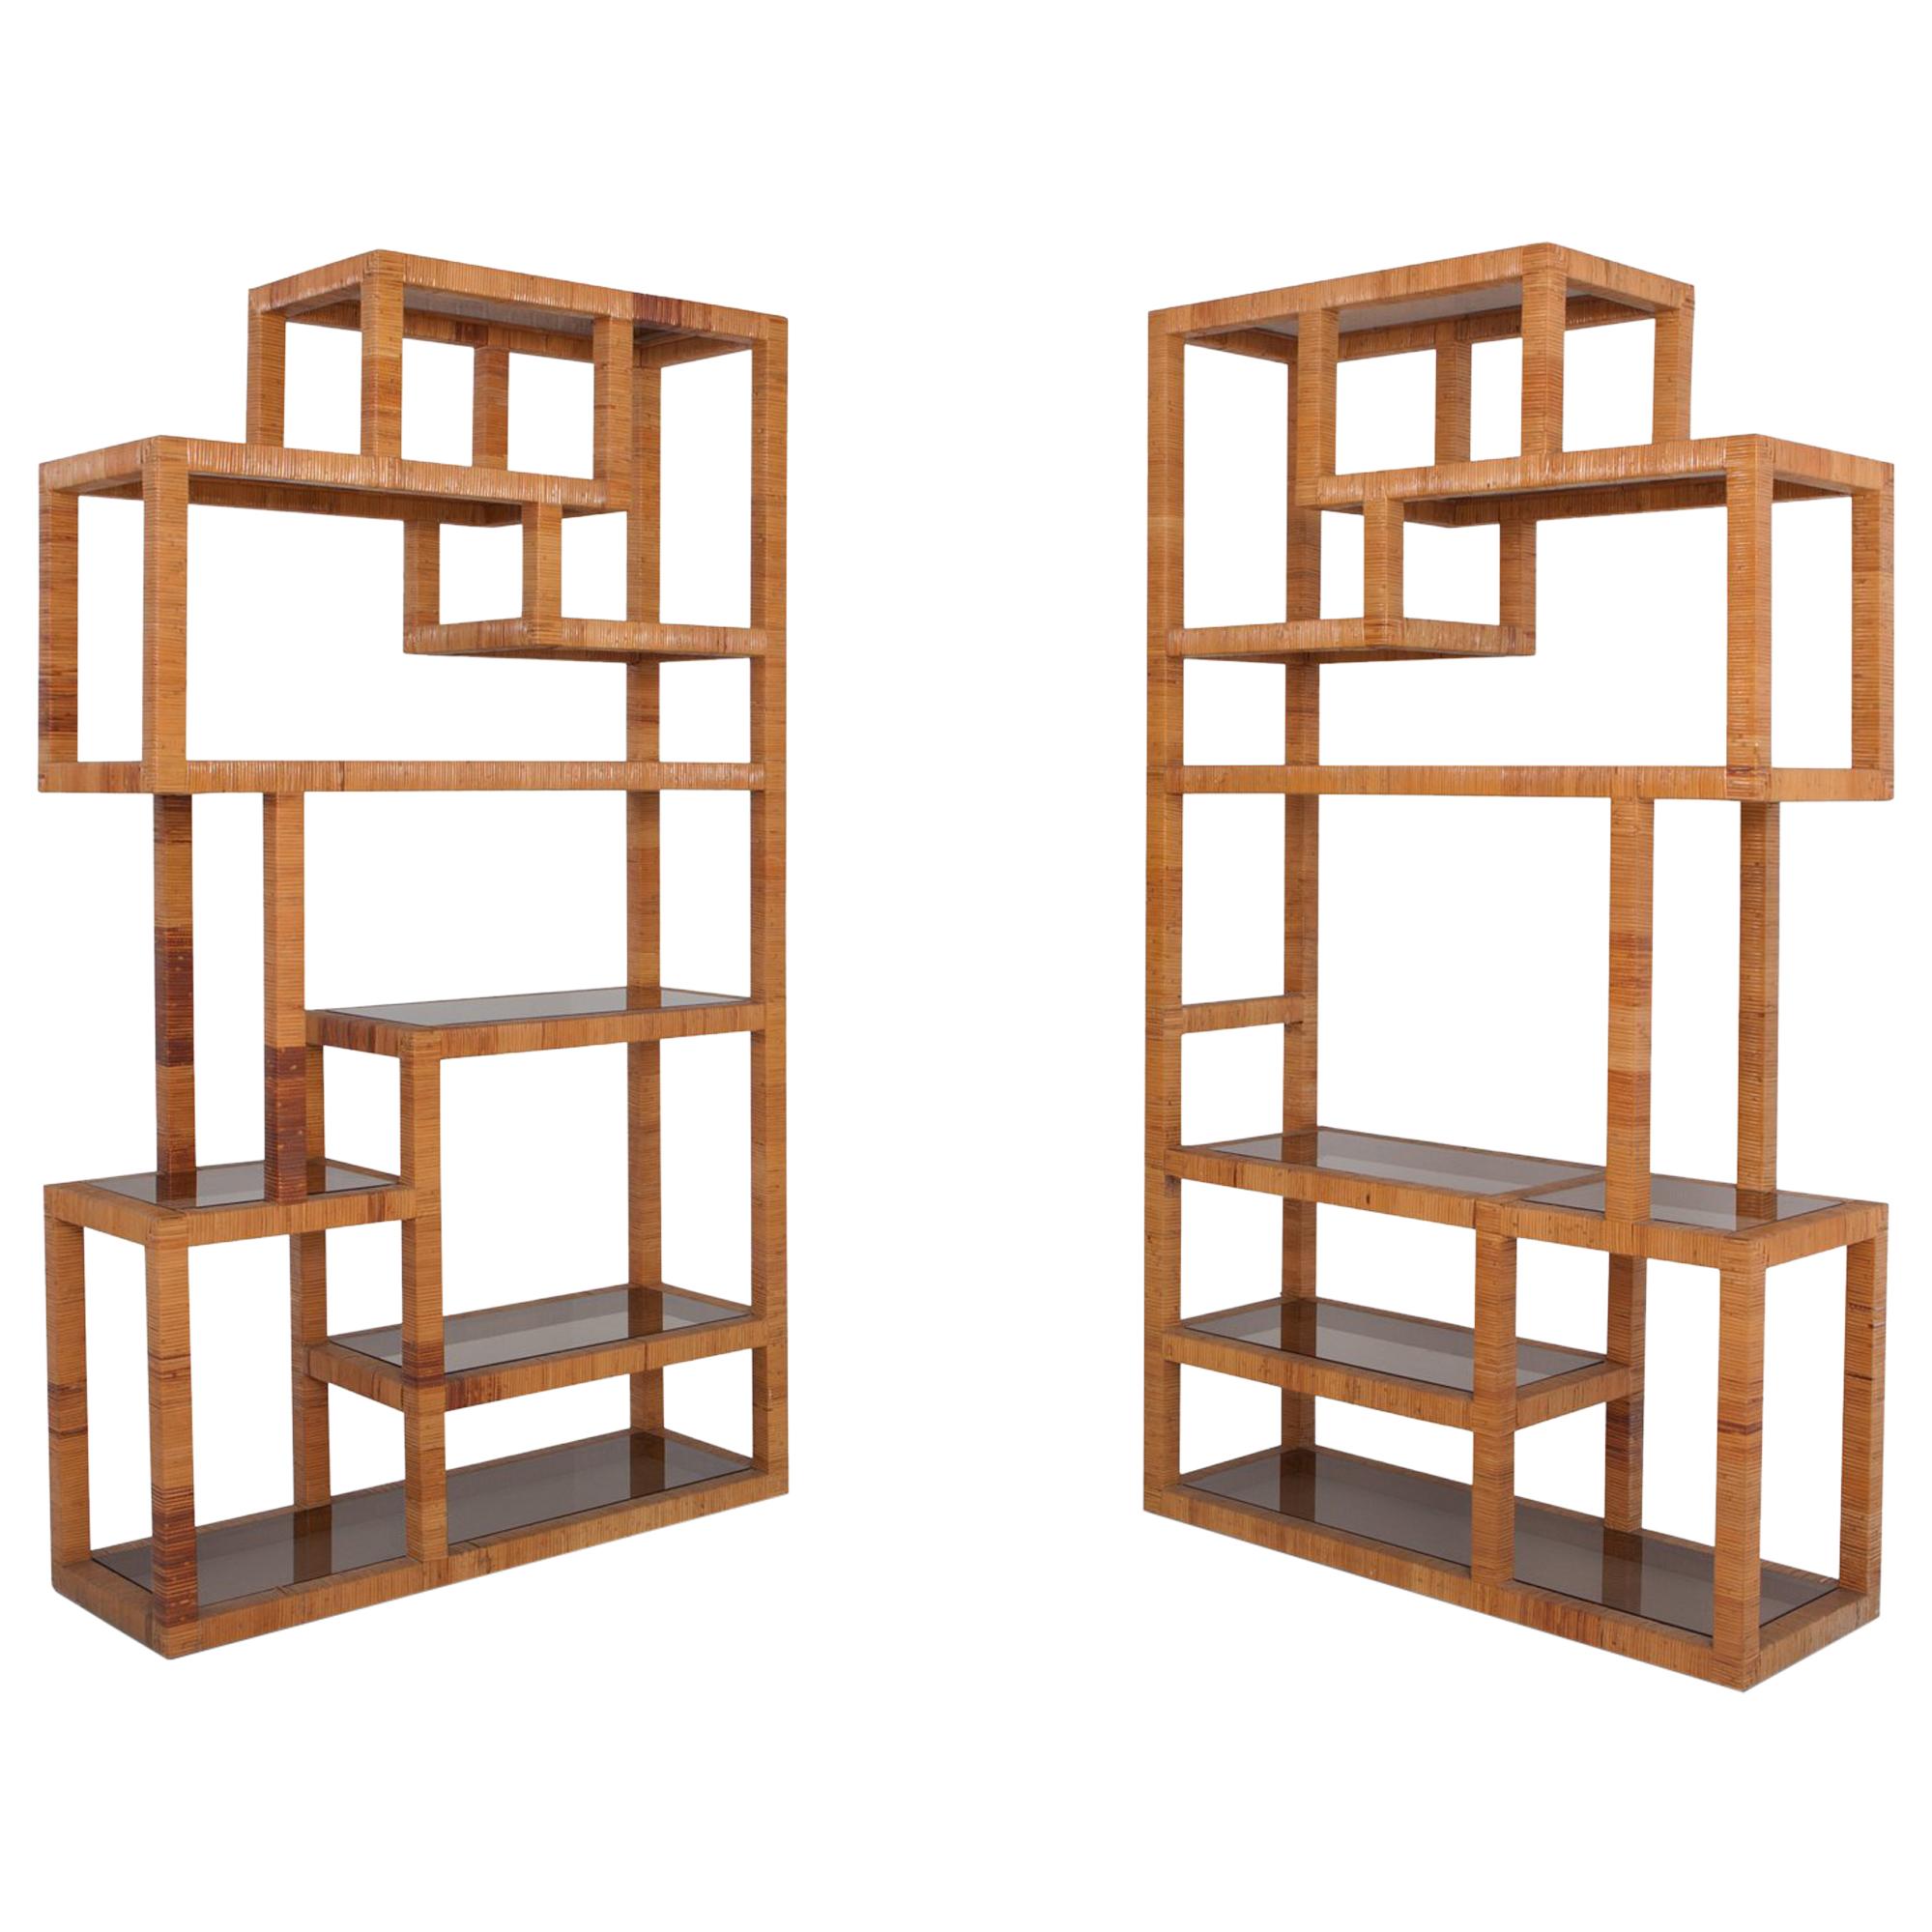 hollywood regency Rattan étagères in true spirit of the Italian designers of Vivai del Sud. 

Due to their size and design these units have a multipurpose use. They can be perfectly used as room dividers, wall units …

Would fit well in a tropical